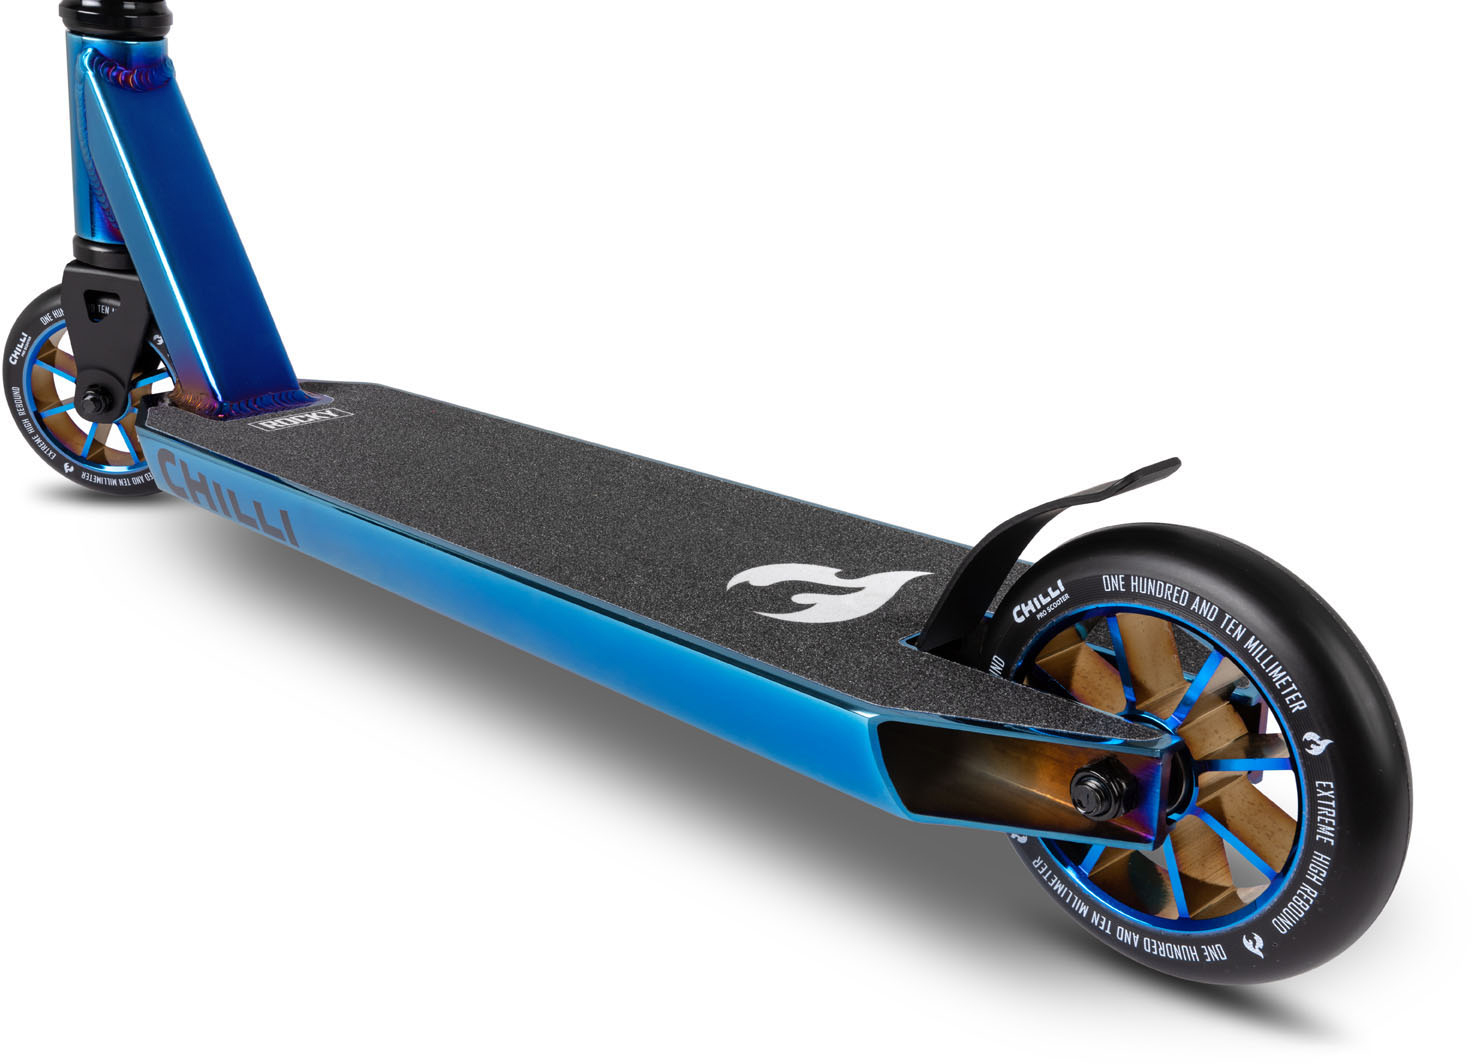 Chilli pro scooter Stunt Roller scooter Rocky scooter Grind Limited Edition Blue